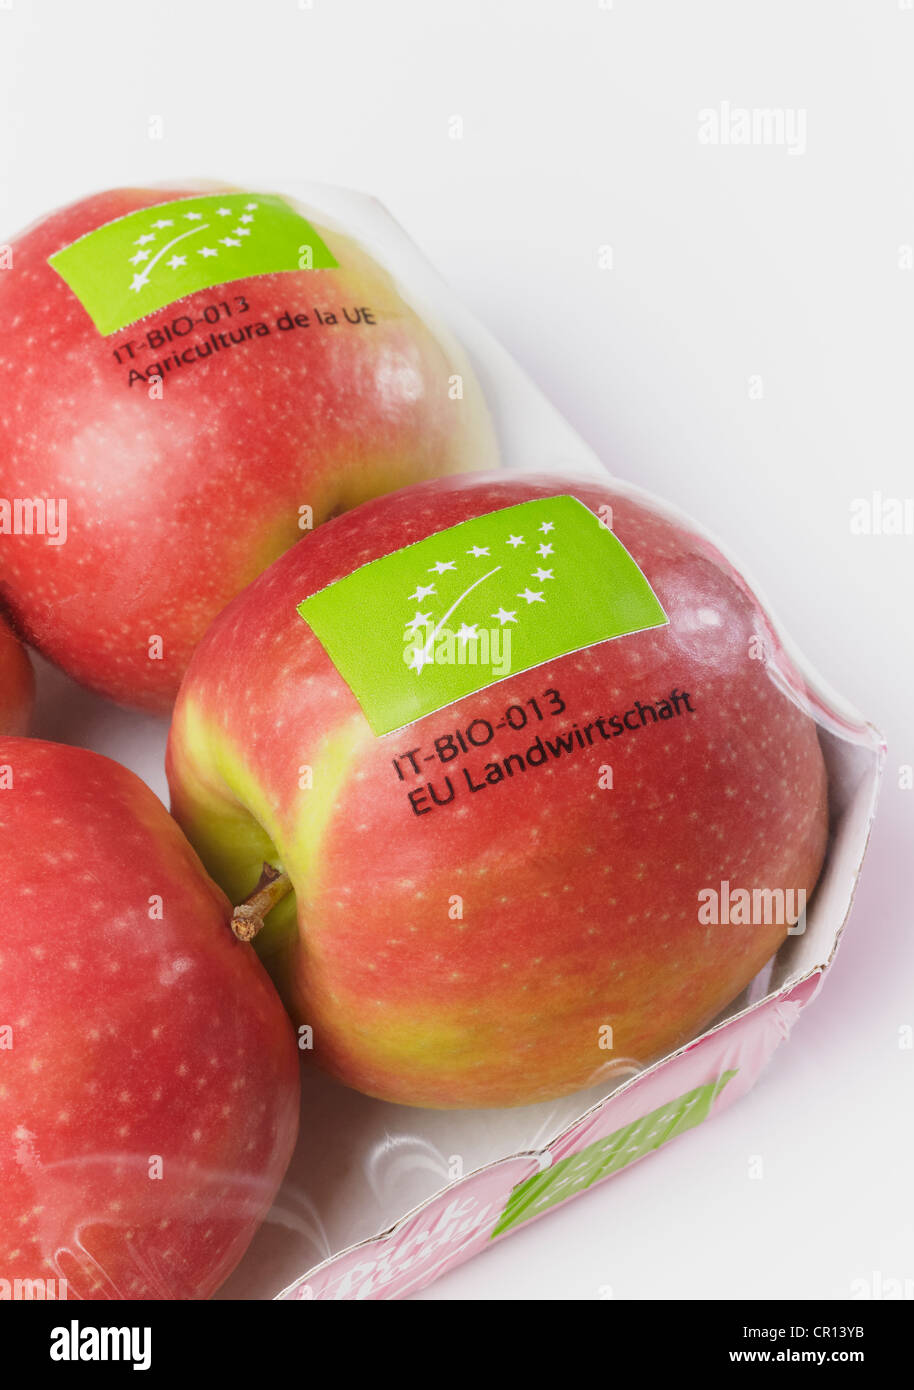 Domex Superfresh Growers® Show Pink Lady® Apples Some Love with